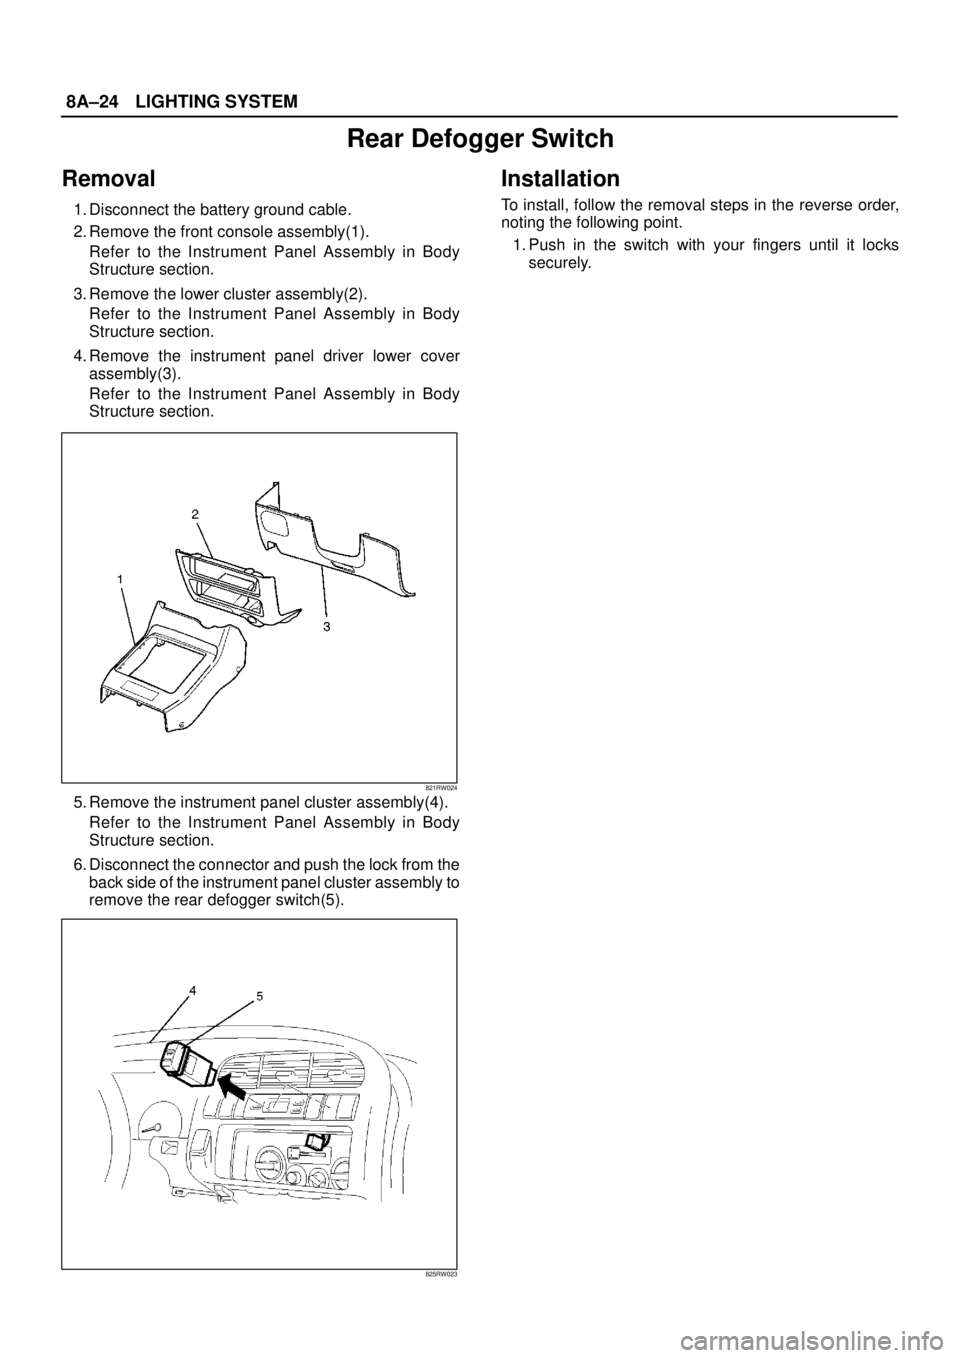 ISUZU TROOPER 1998  Service Repair Manual 8A–24LIGHTING SYSTEM
Rear Defogger Switch
Removal
1. Disconnect the battery ground cable.
2. Remove the front console assembly(1). 
Refer to the Instrument Panel Assembly in Body
Structure section.
